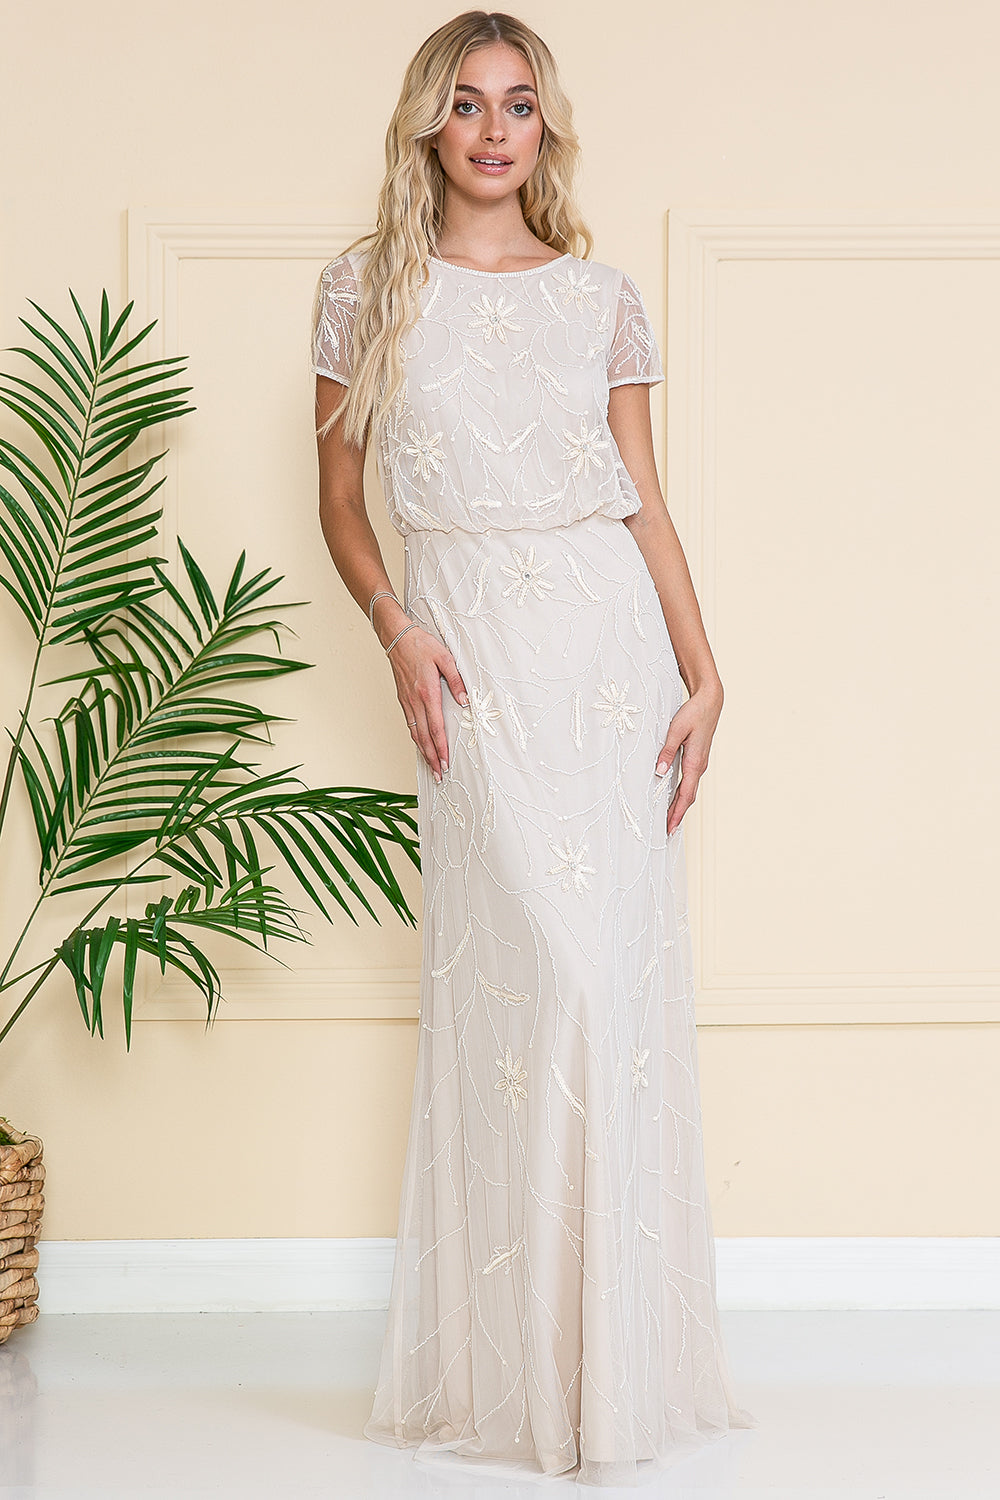 Wholesale Mother of the Bride Dresses - High Quality Mother of the